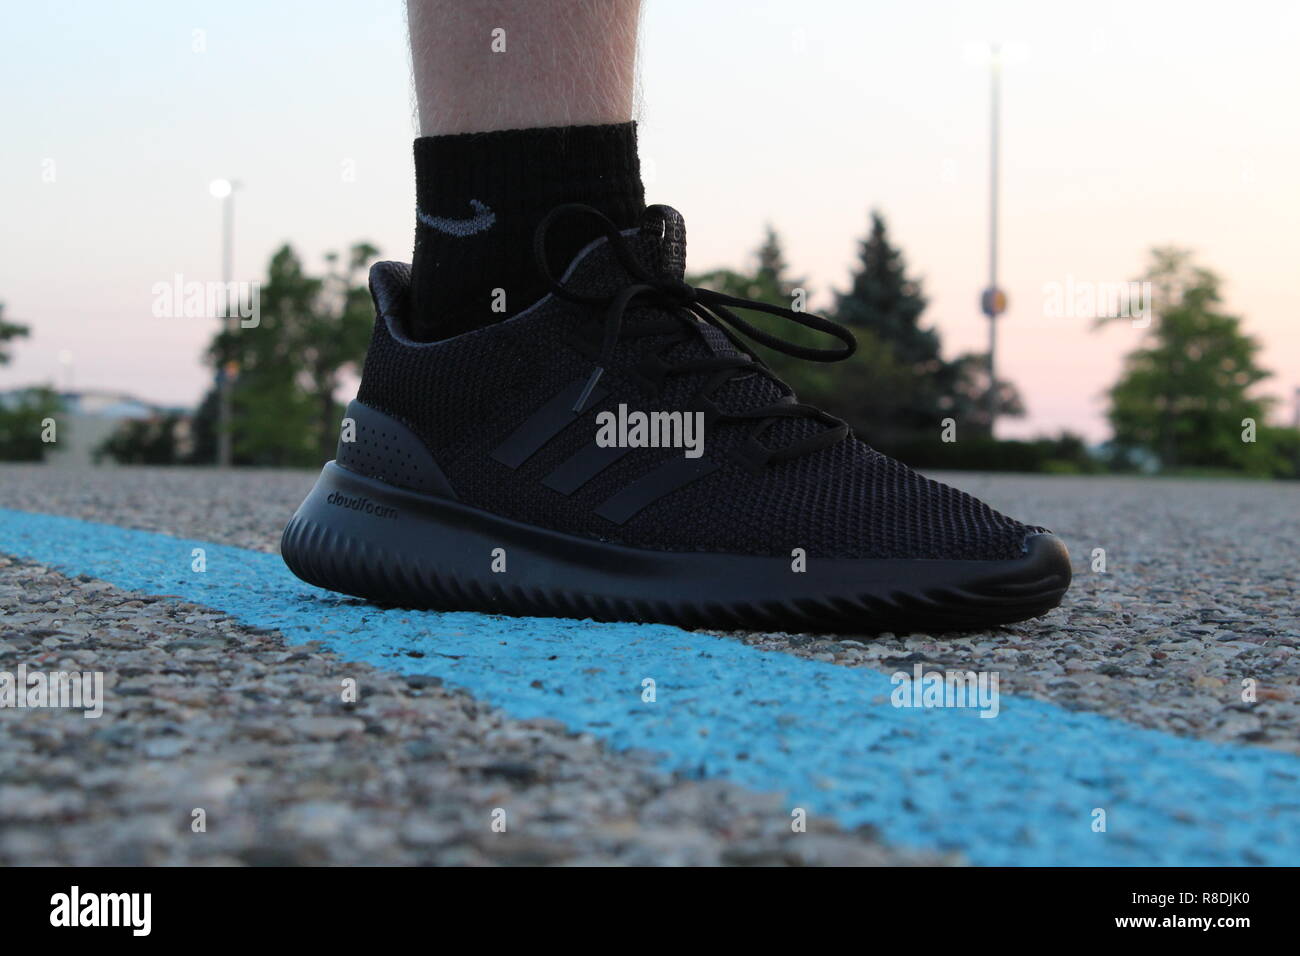 Adidas Cloudfoam Ultimate Athletic Shoes on Pavement Stock Photo - Alamy